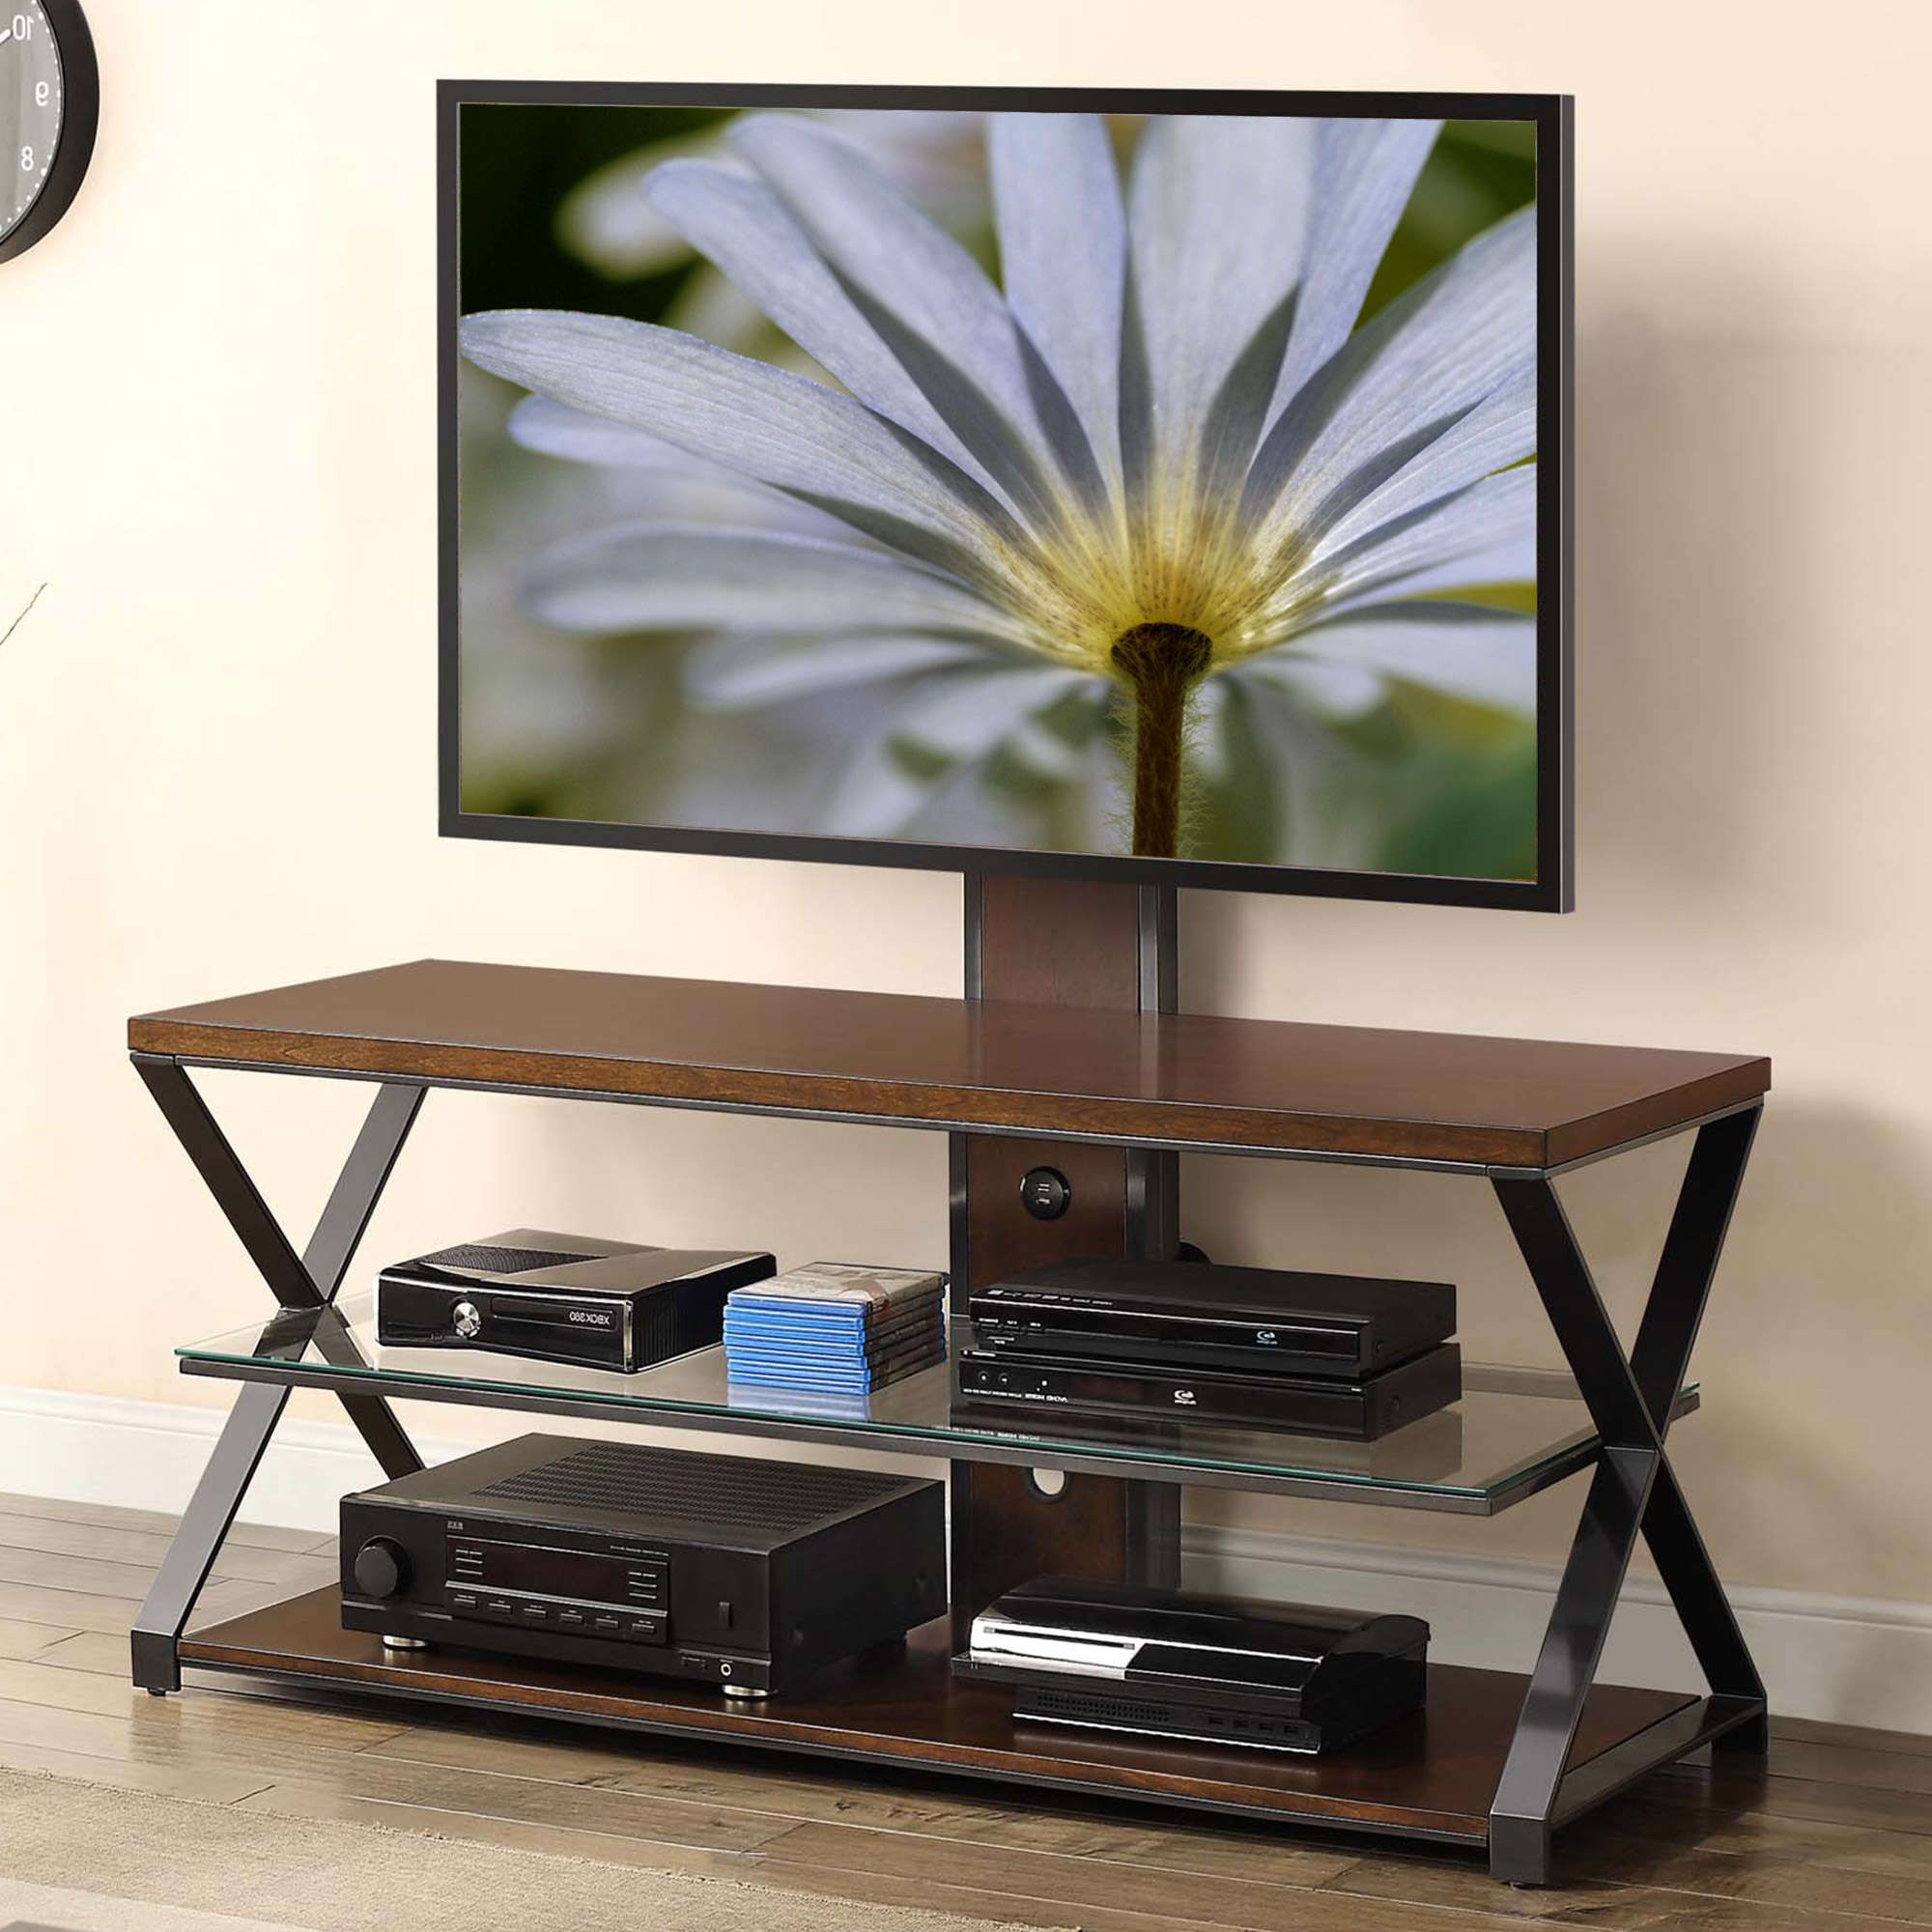 2018 Jaxon 3 In 1 Cognac Tv Stand For Tvs Up To 70" – Walmart Throughout Jaxon 71 Inch Tv Stands (View 2 of 20)